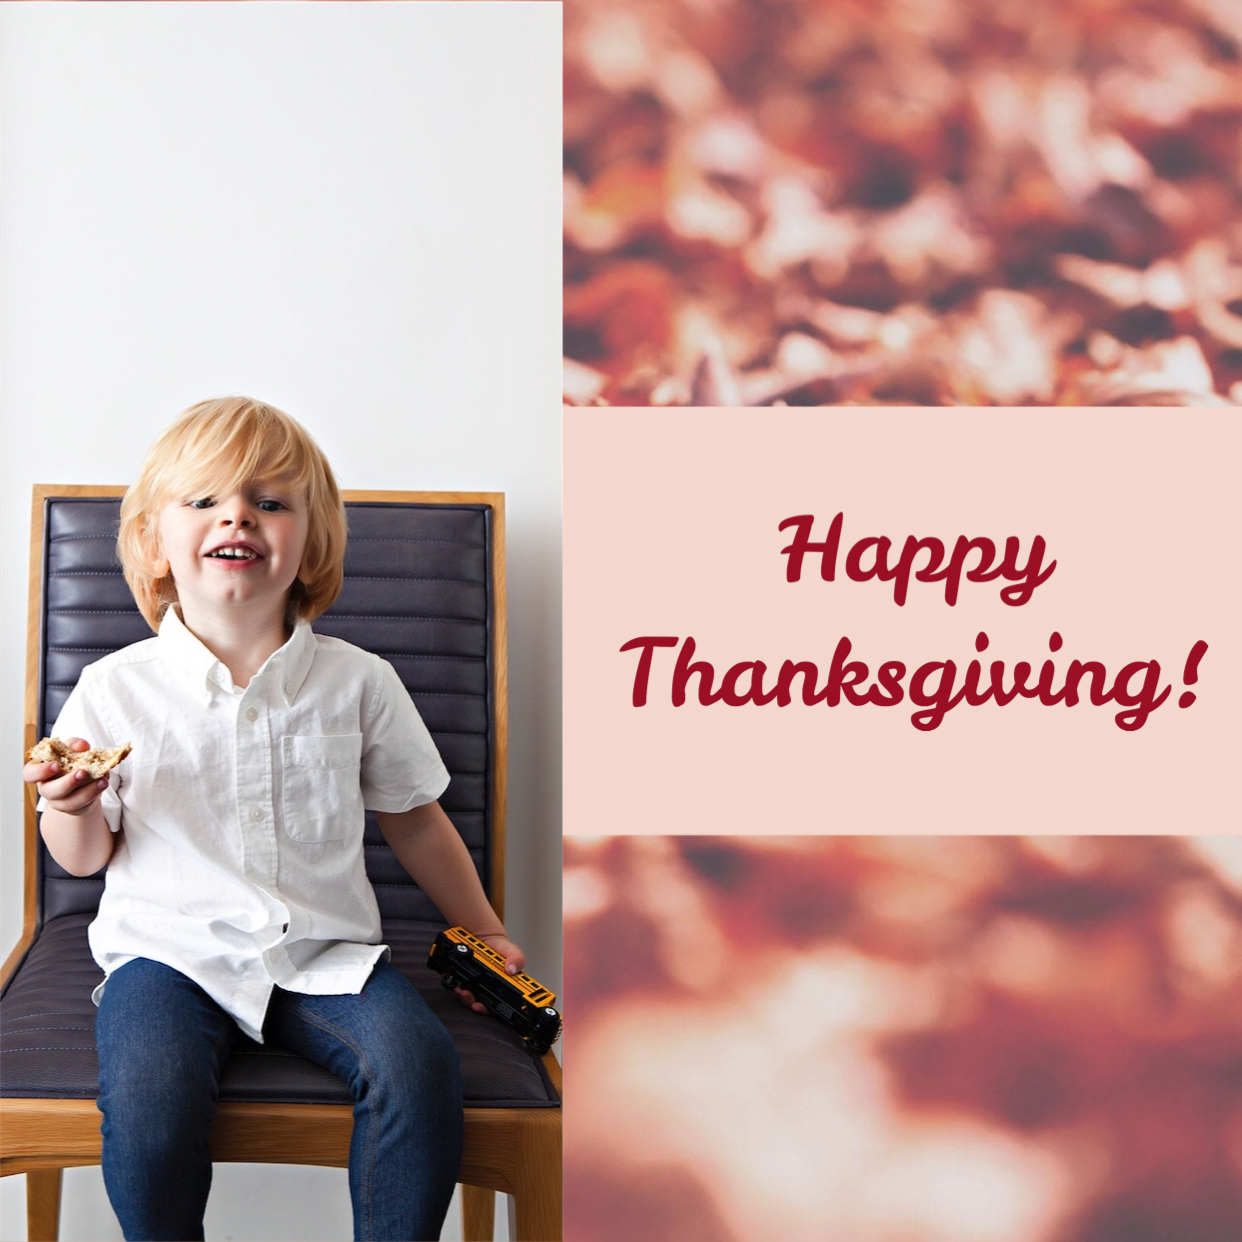 A Little Girl Sitting On A Bench With A Turkey Thanksgiving Template